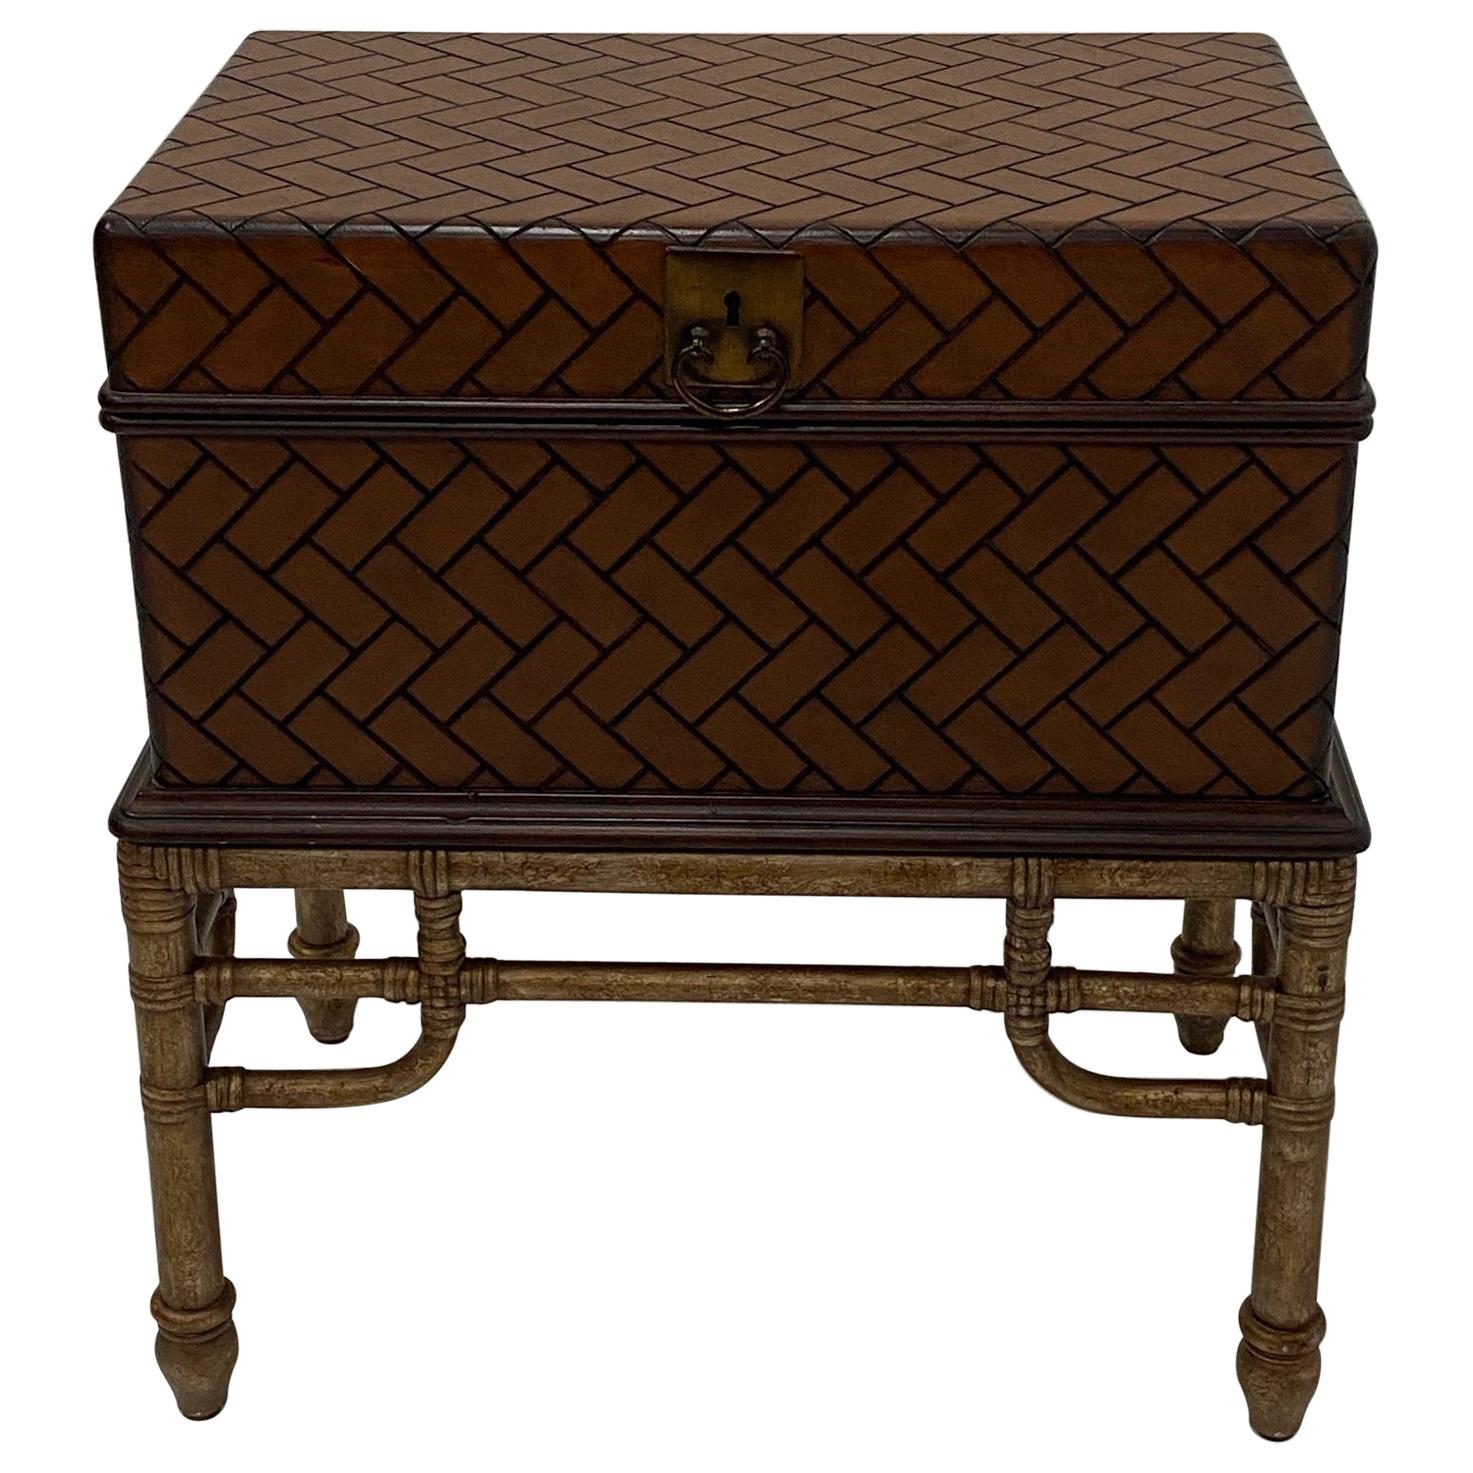 Handsome Woven Wooden Box on Bamboo Stand End Table